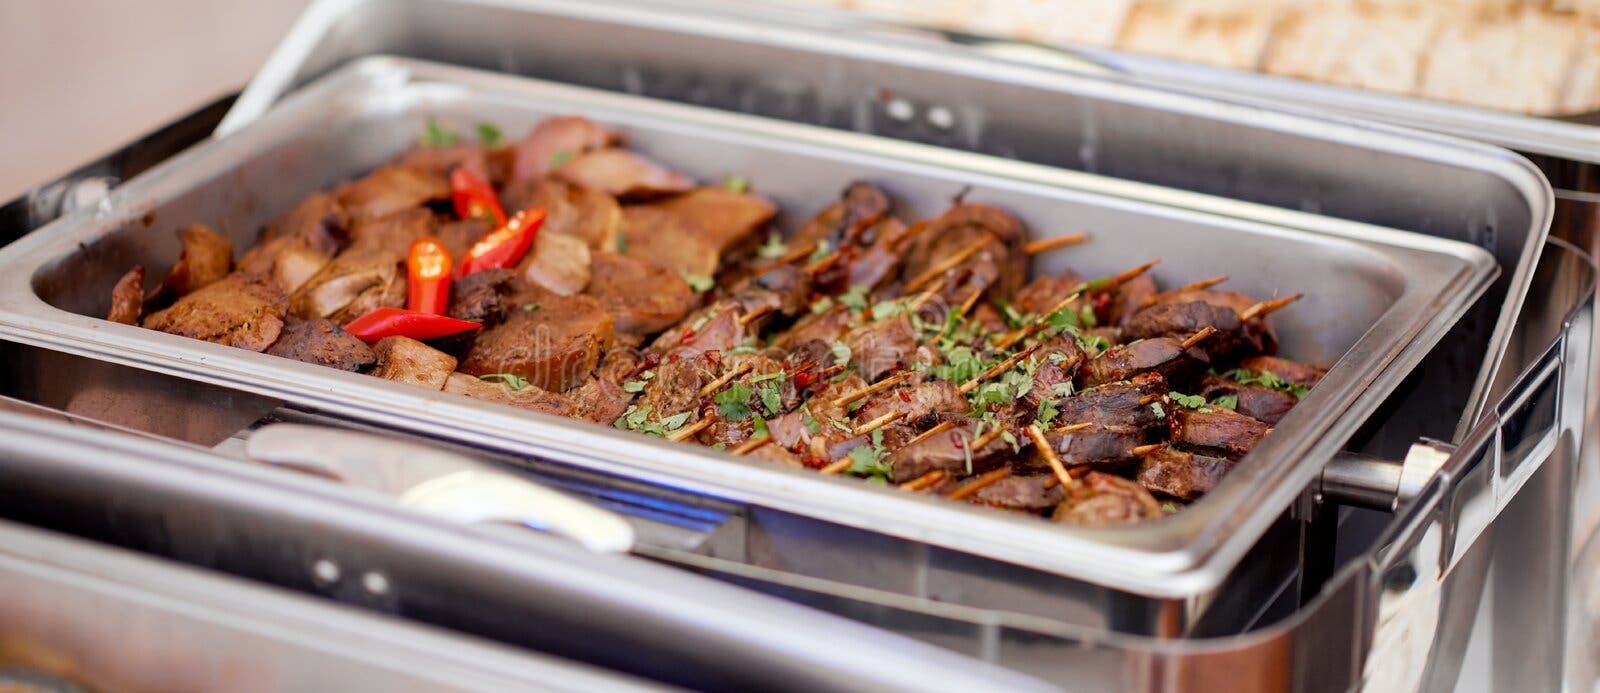 https://thumbs.dreamstime.com/b/stainless-hotel-pans-food-warmers-various-meals-self-service-buffet-table-celebration-party-wedding-grilled-beef-steaks-189972850.jpg?w=1600